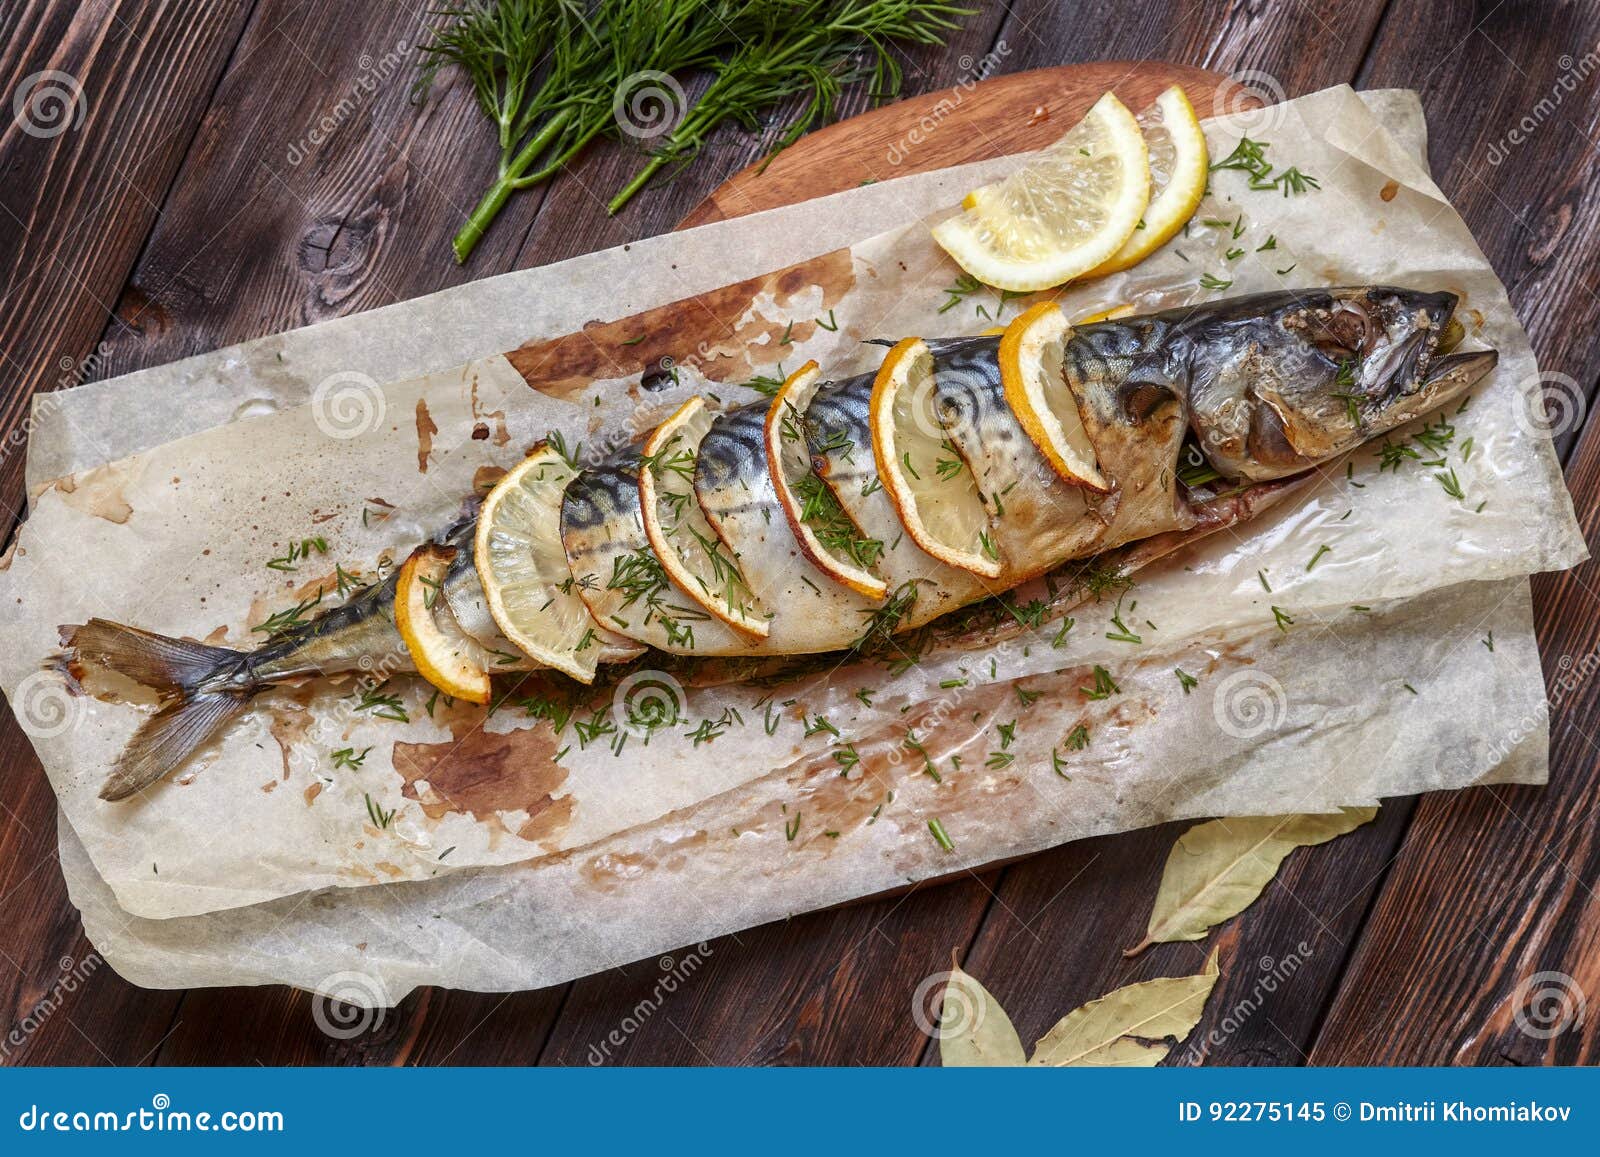 whole baked mackerel or scomber fish with lemon on paper